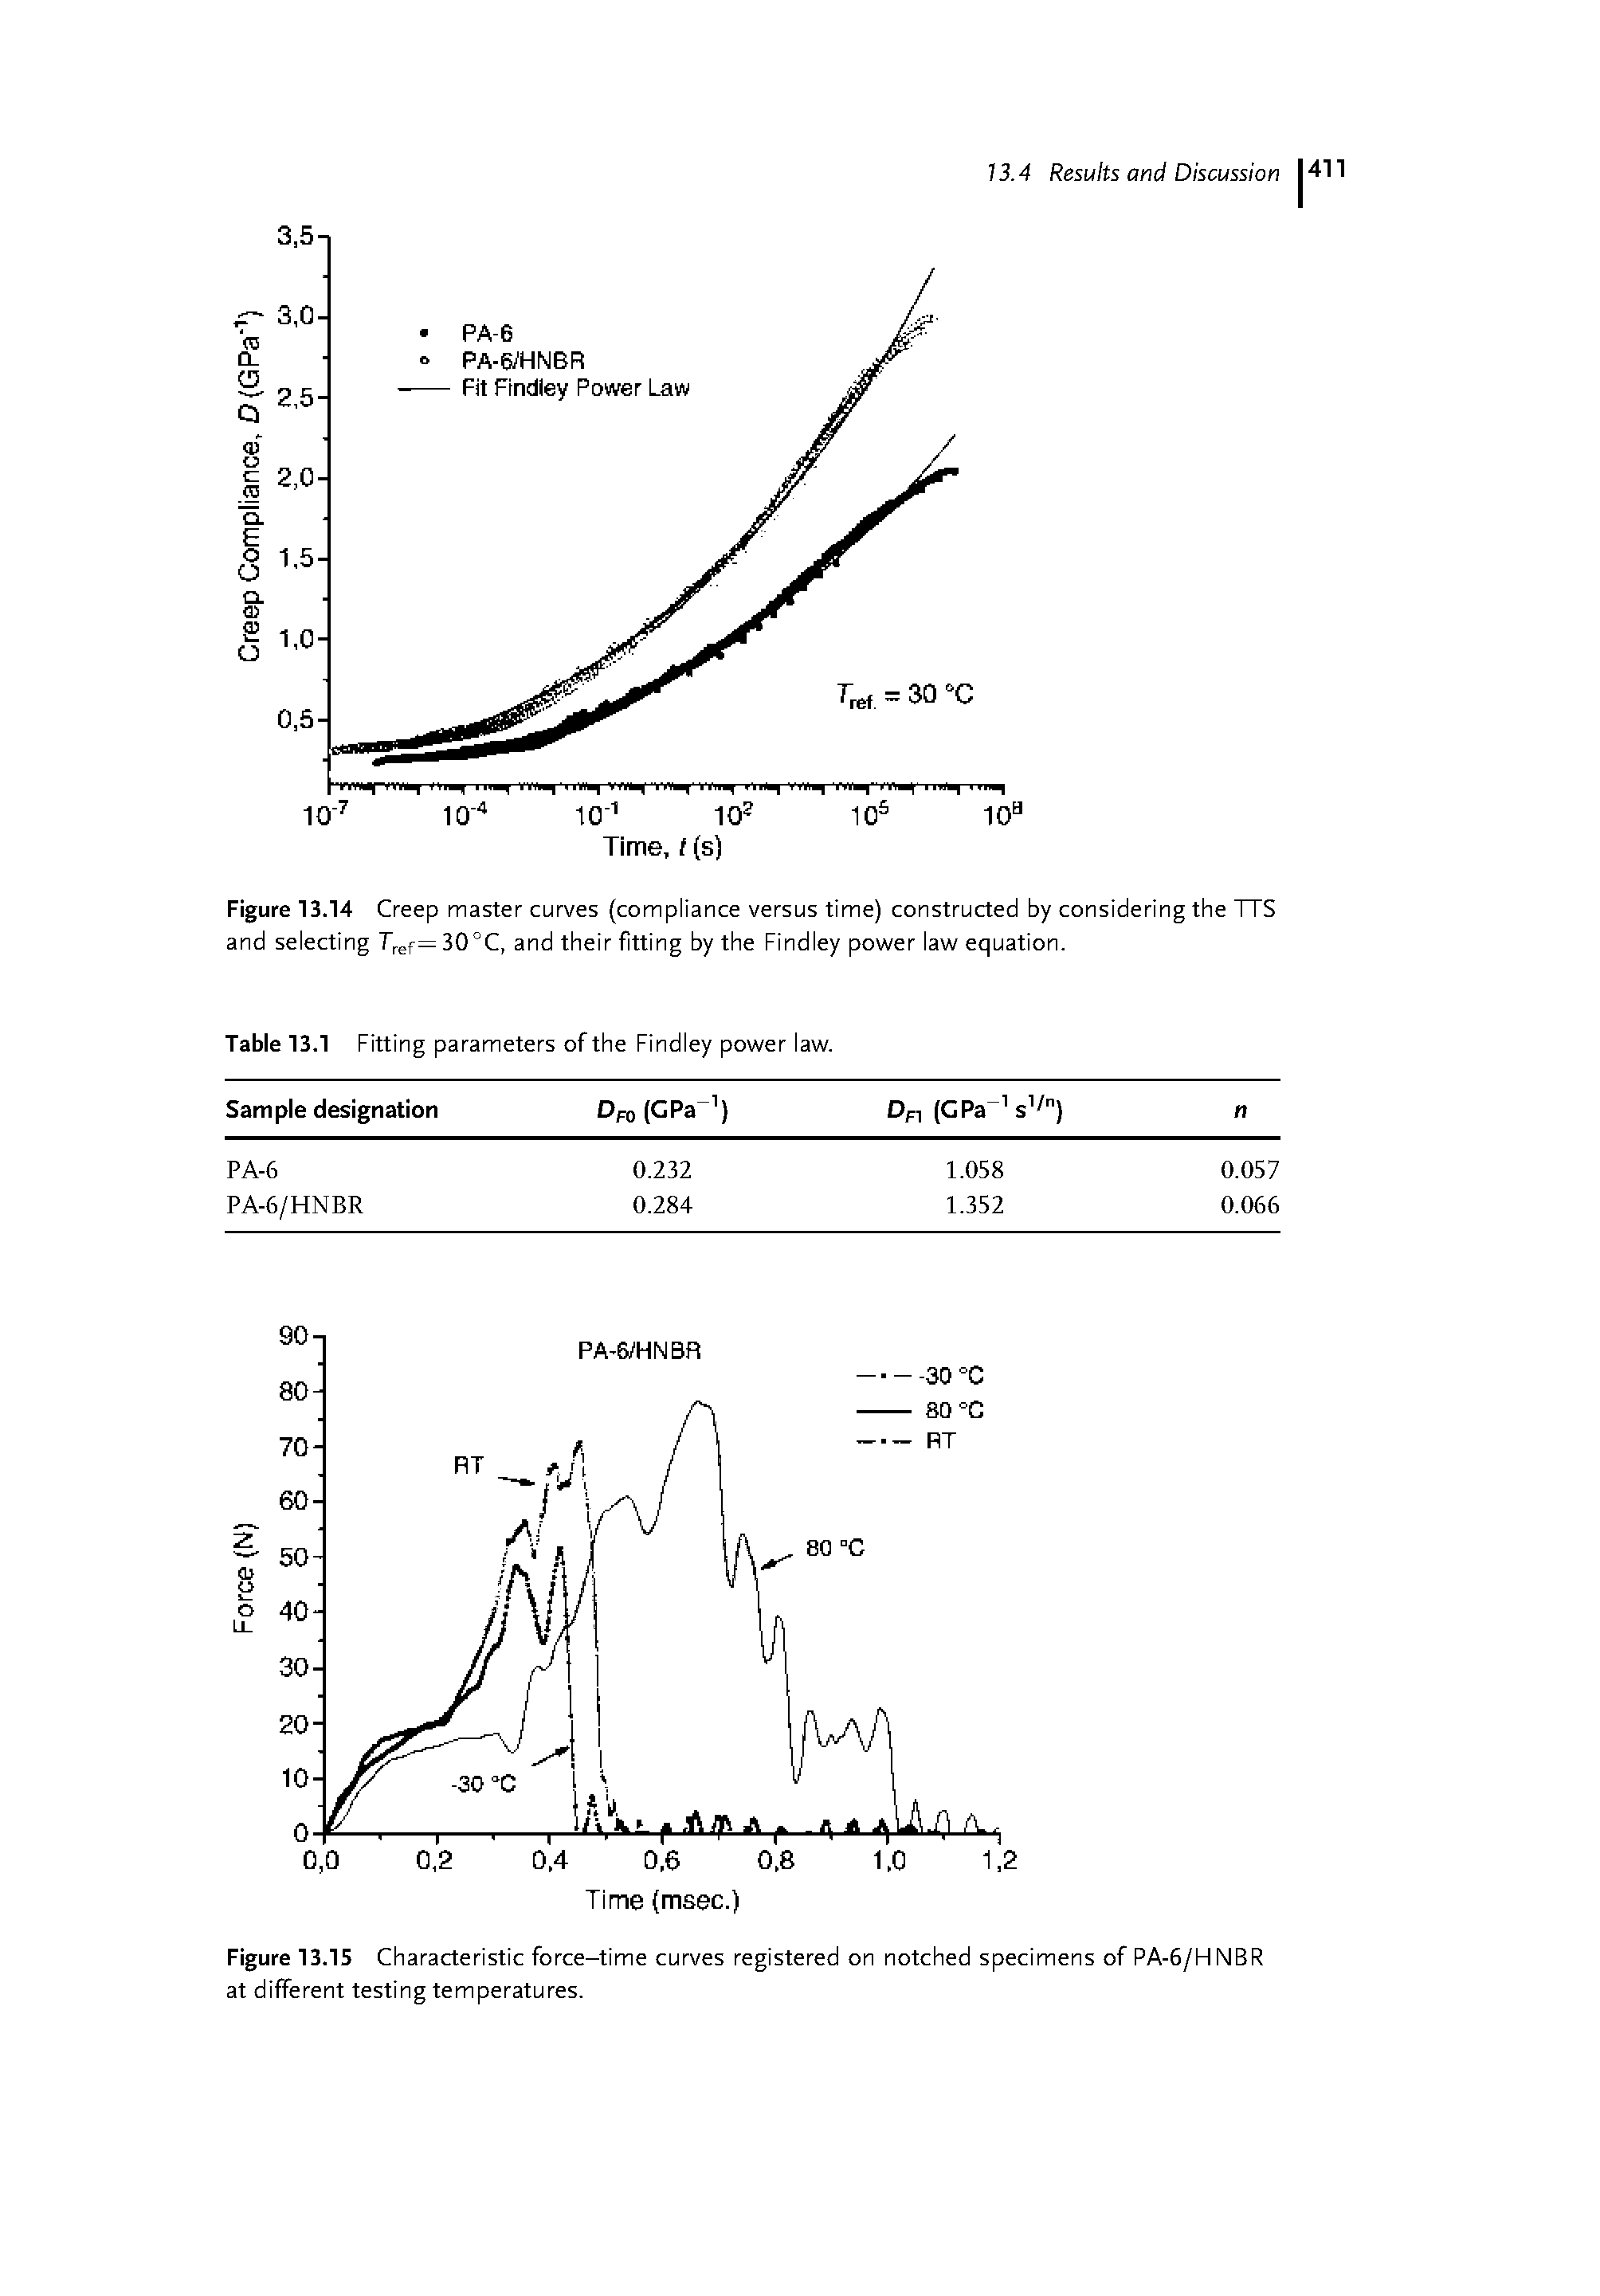 Figure 13.14 Creep master curves (compliance versus time) constructed by considering the TTS and selecting 30°C, and their fitting by the Findley power law equation.